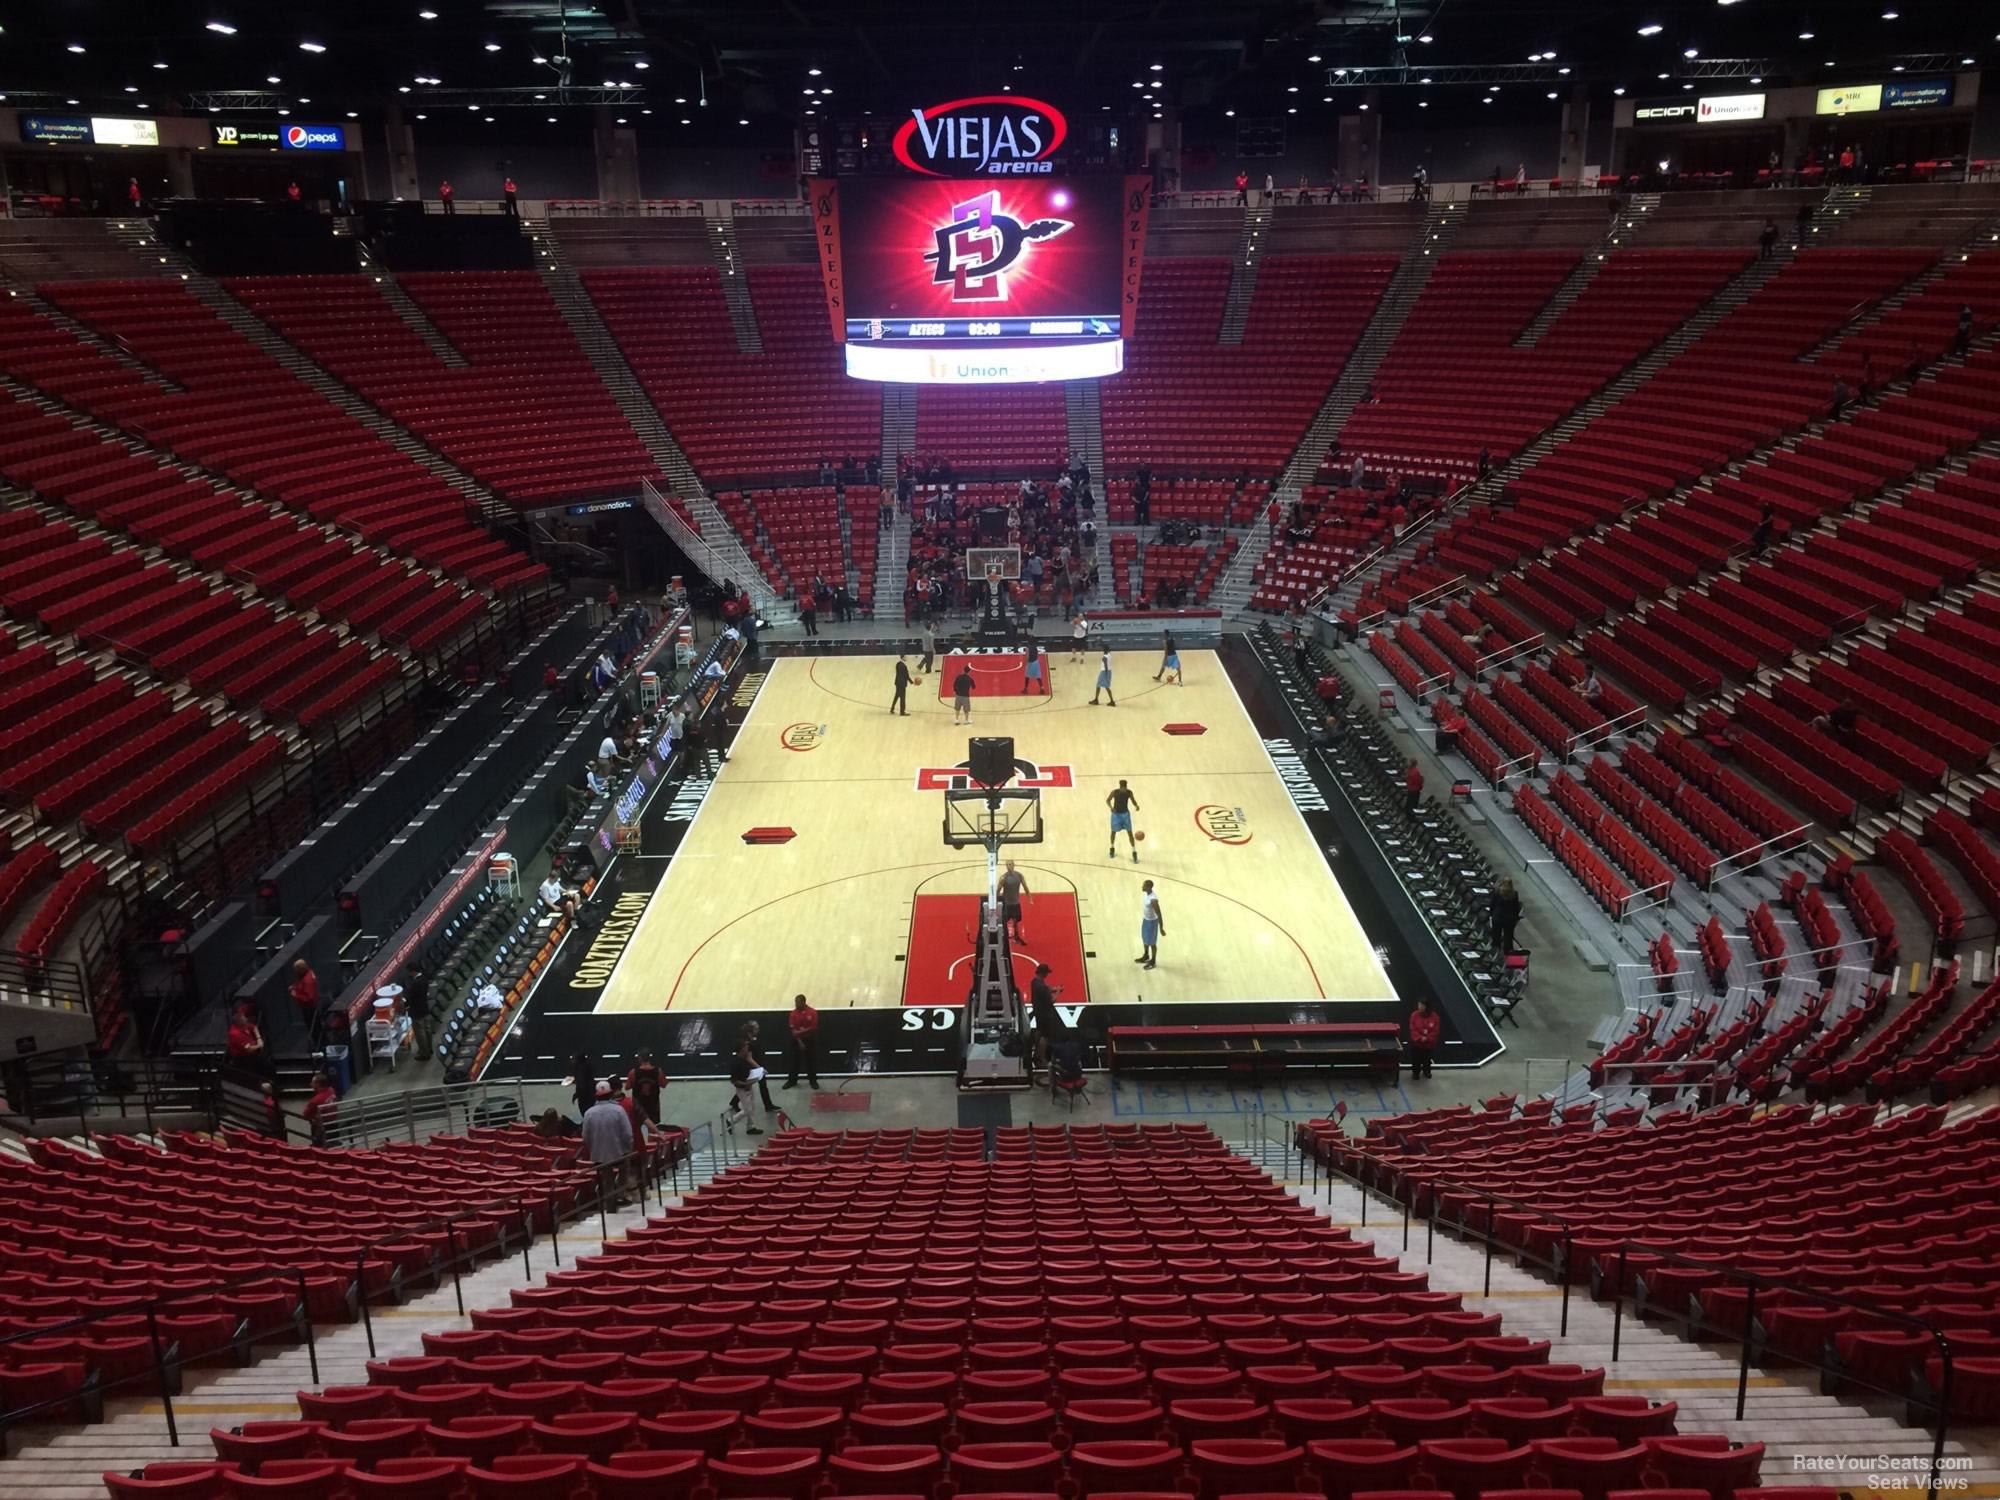 Viejas Arena Interactive Concert Seating Chart Elcho Table